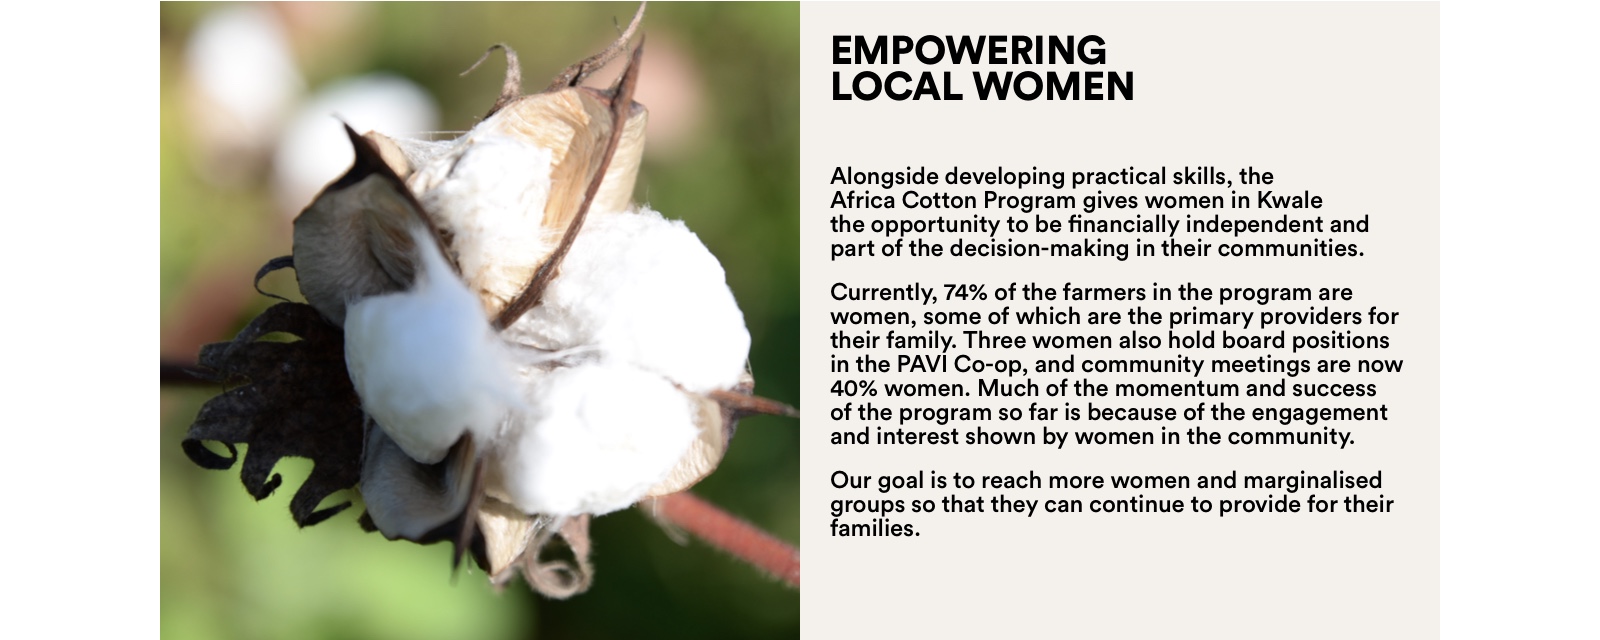 Empowering Local Women. The Africa Cotton Program gives women in Kwale the opportunity to be financially independant.